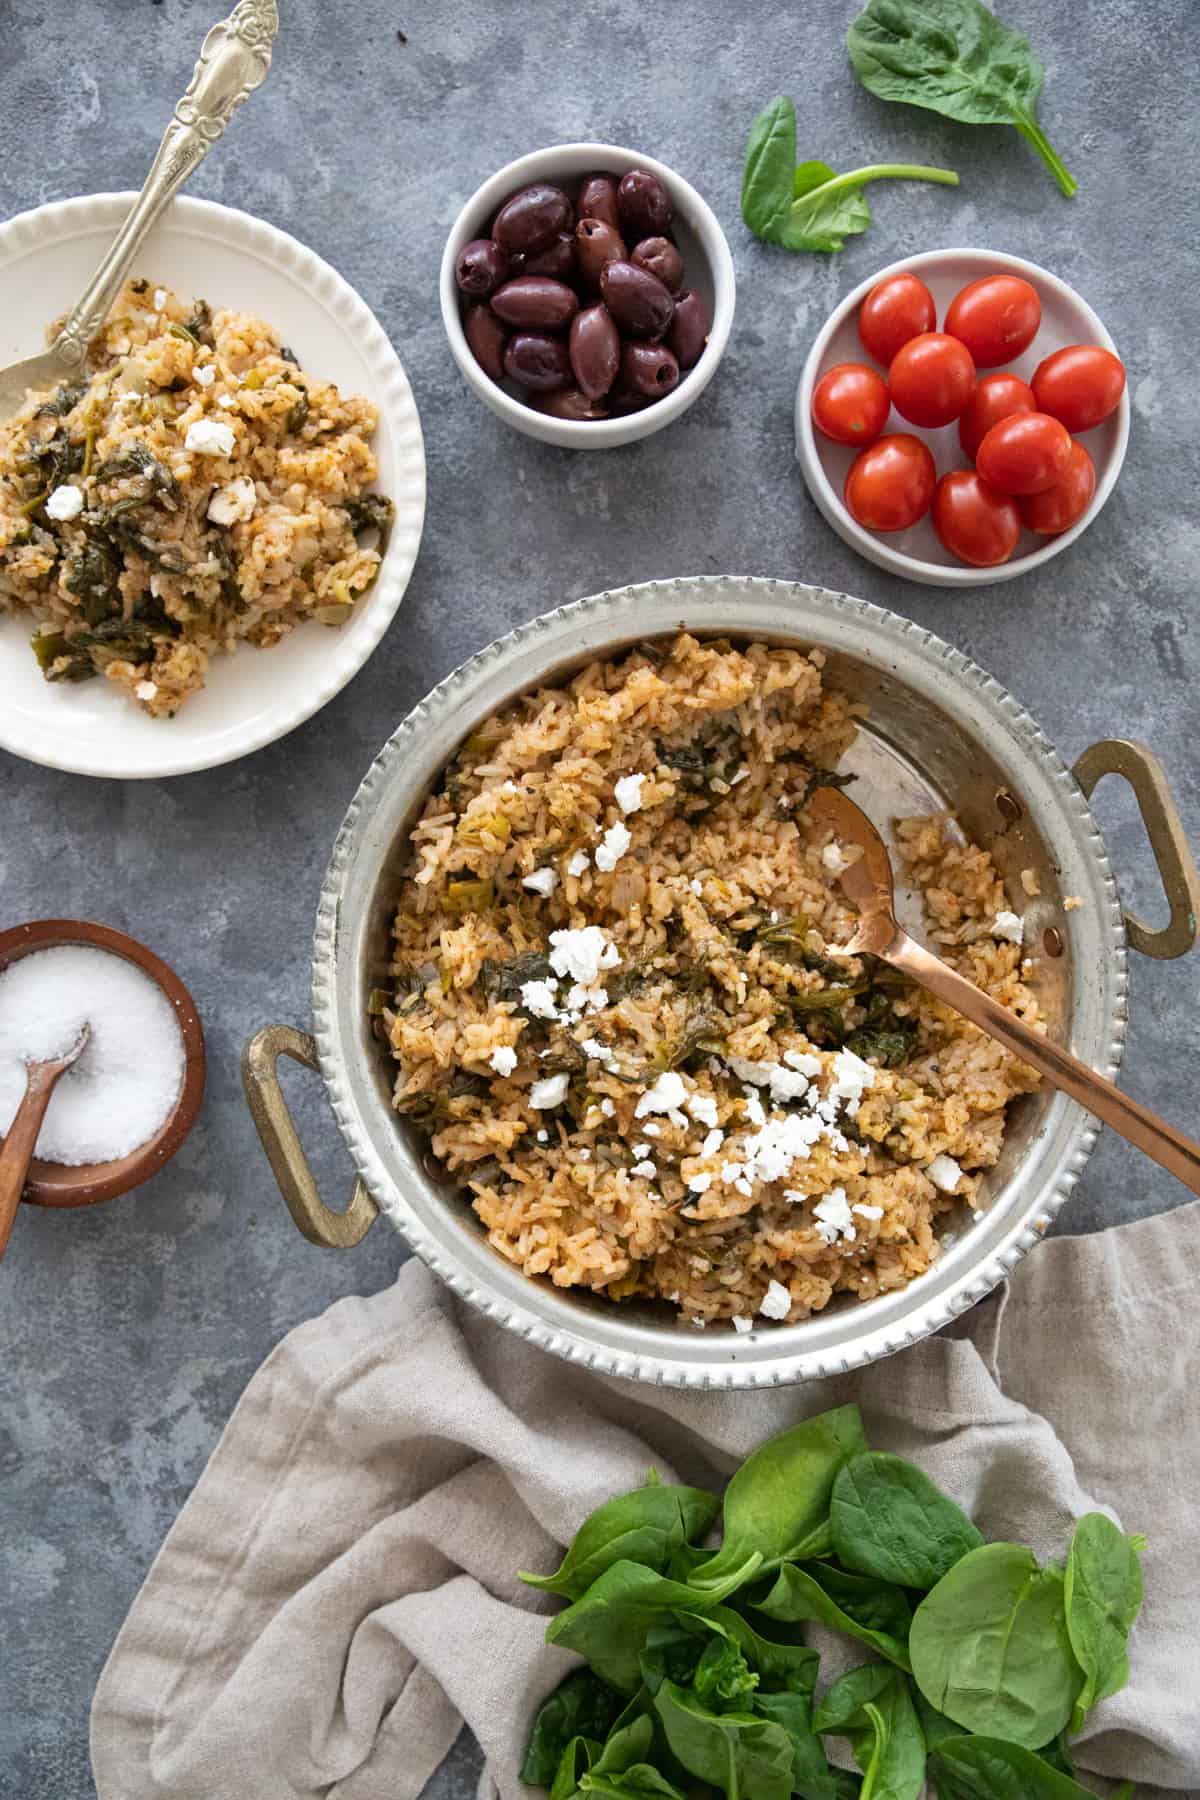 A pan or Greek spinach rice and a plate with a side of tomatoes and olives. 